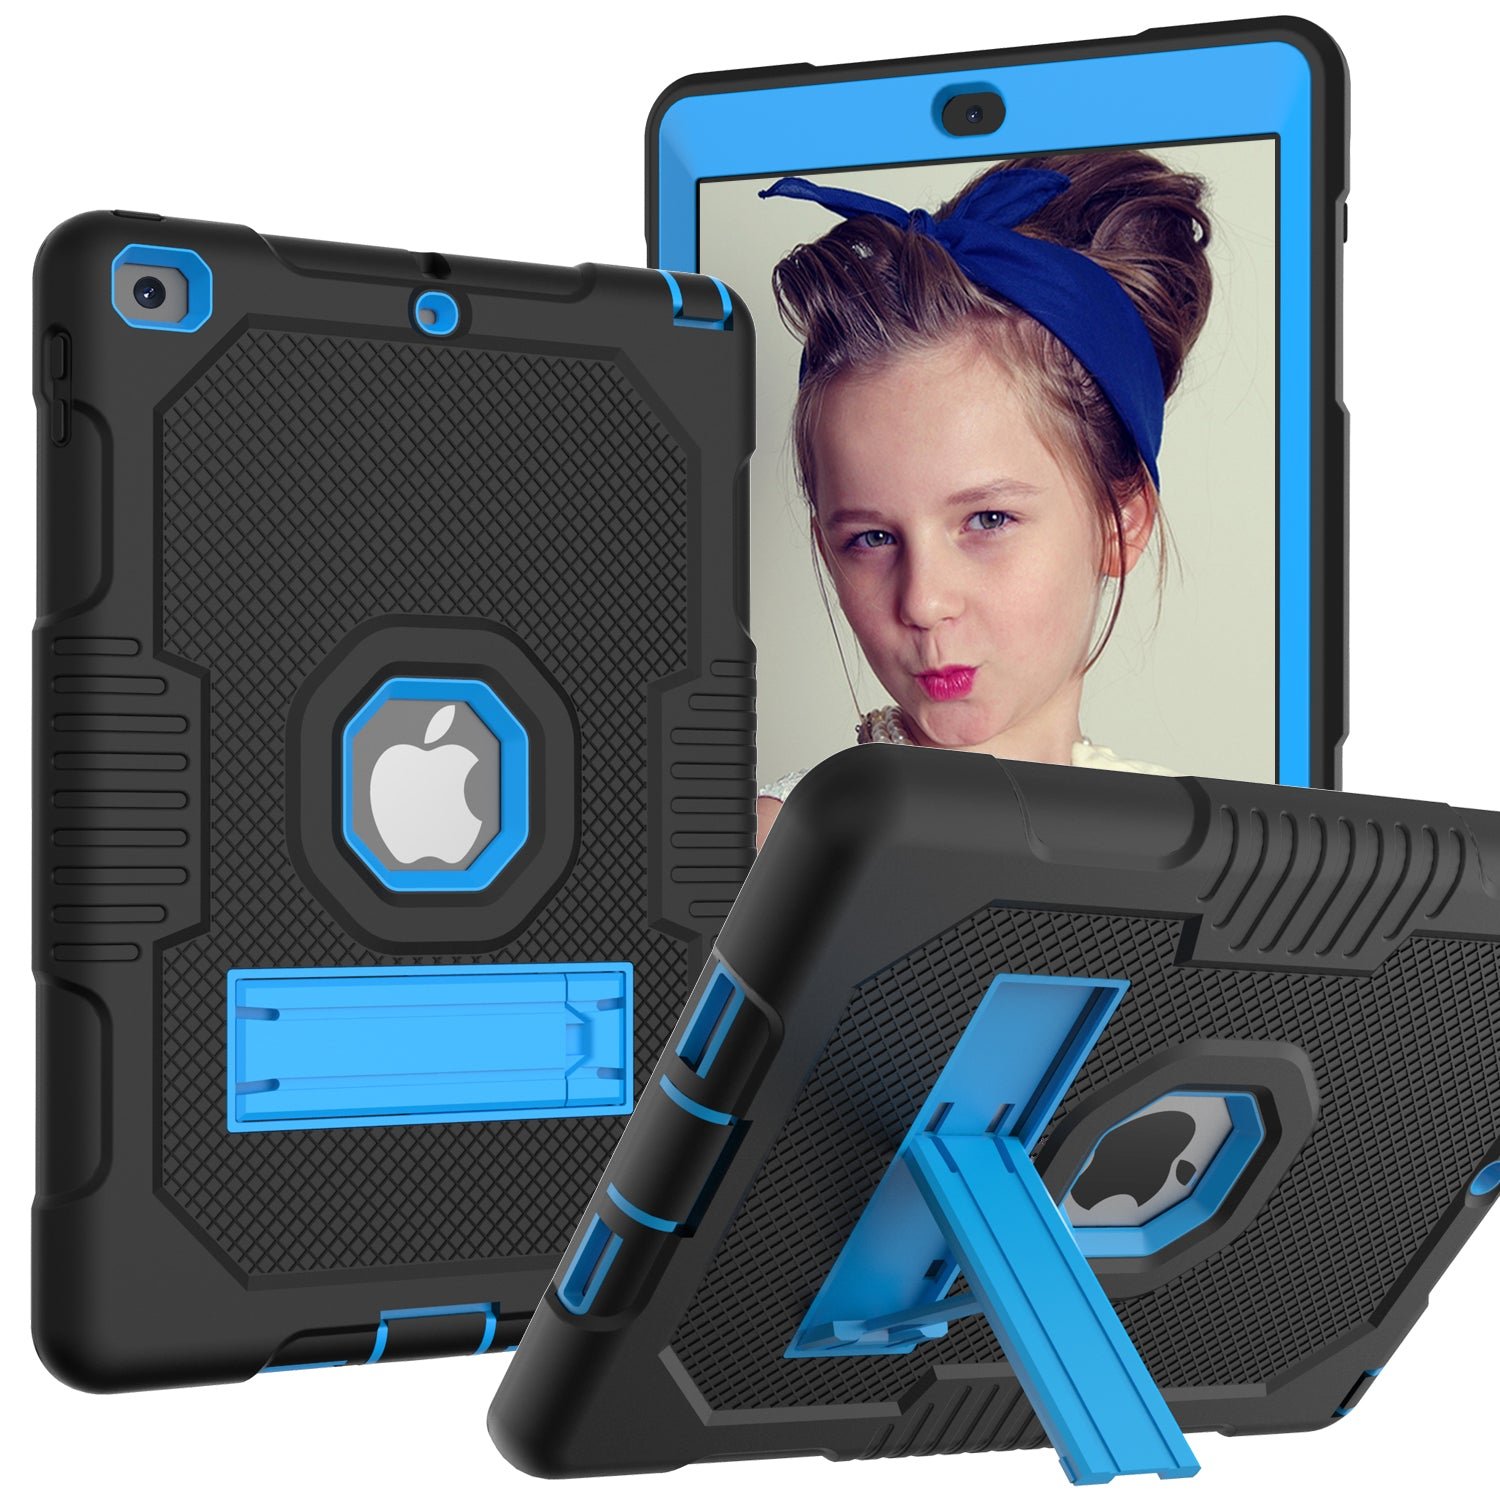 Protective Rugged iPad Case for (9.7-Inch, For iPad 5th & 6th Gen) -  Kickstand Included